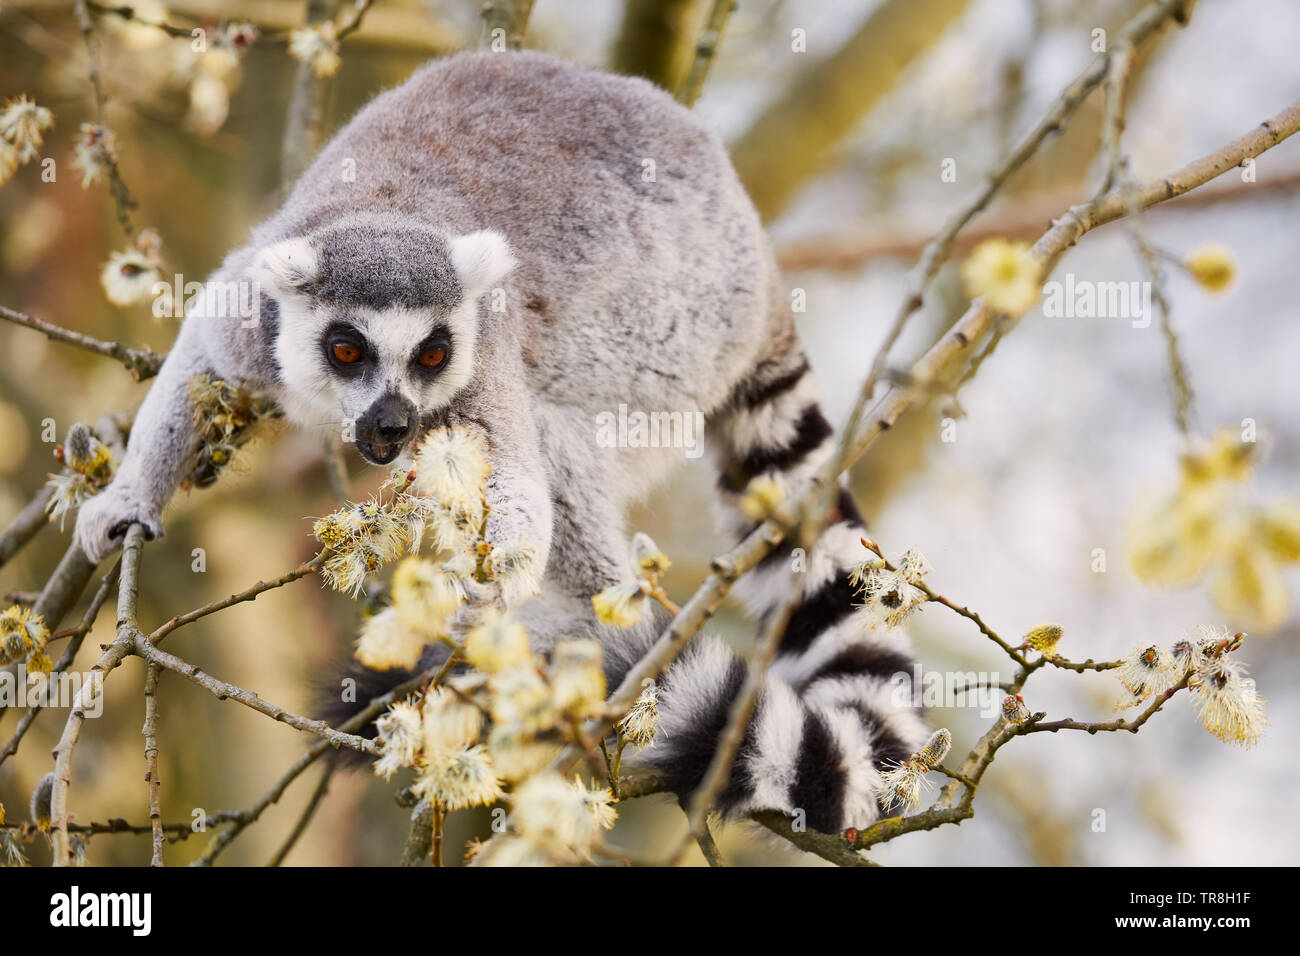 Ring-tailed Lemur in a tree, eating insects from the blossom Stock Photo